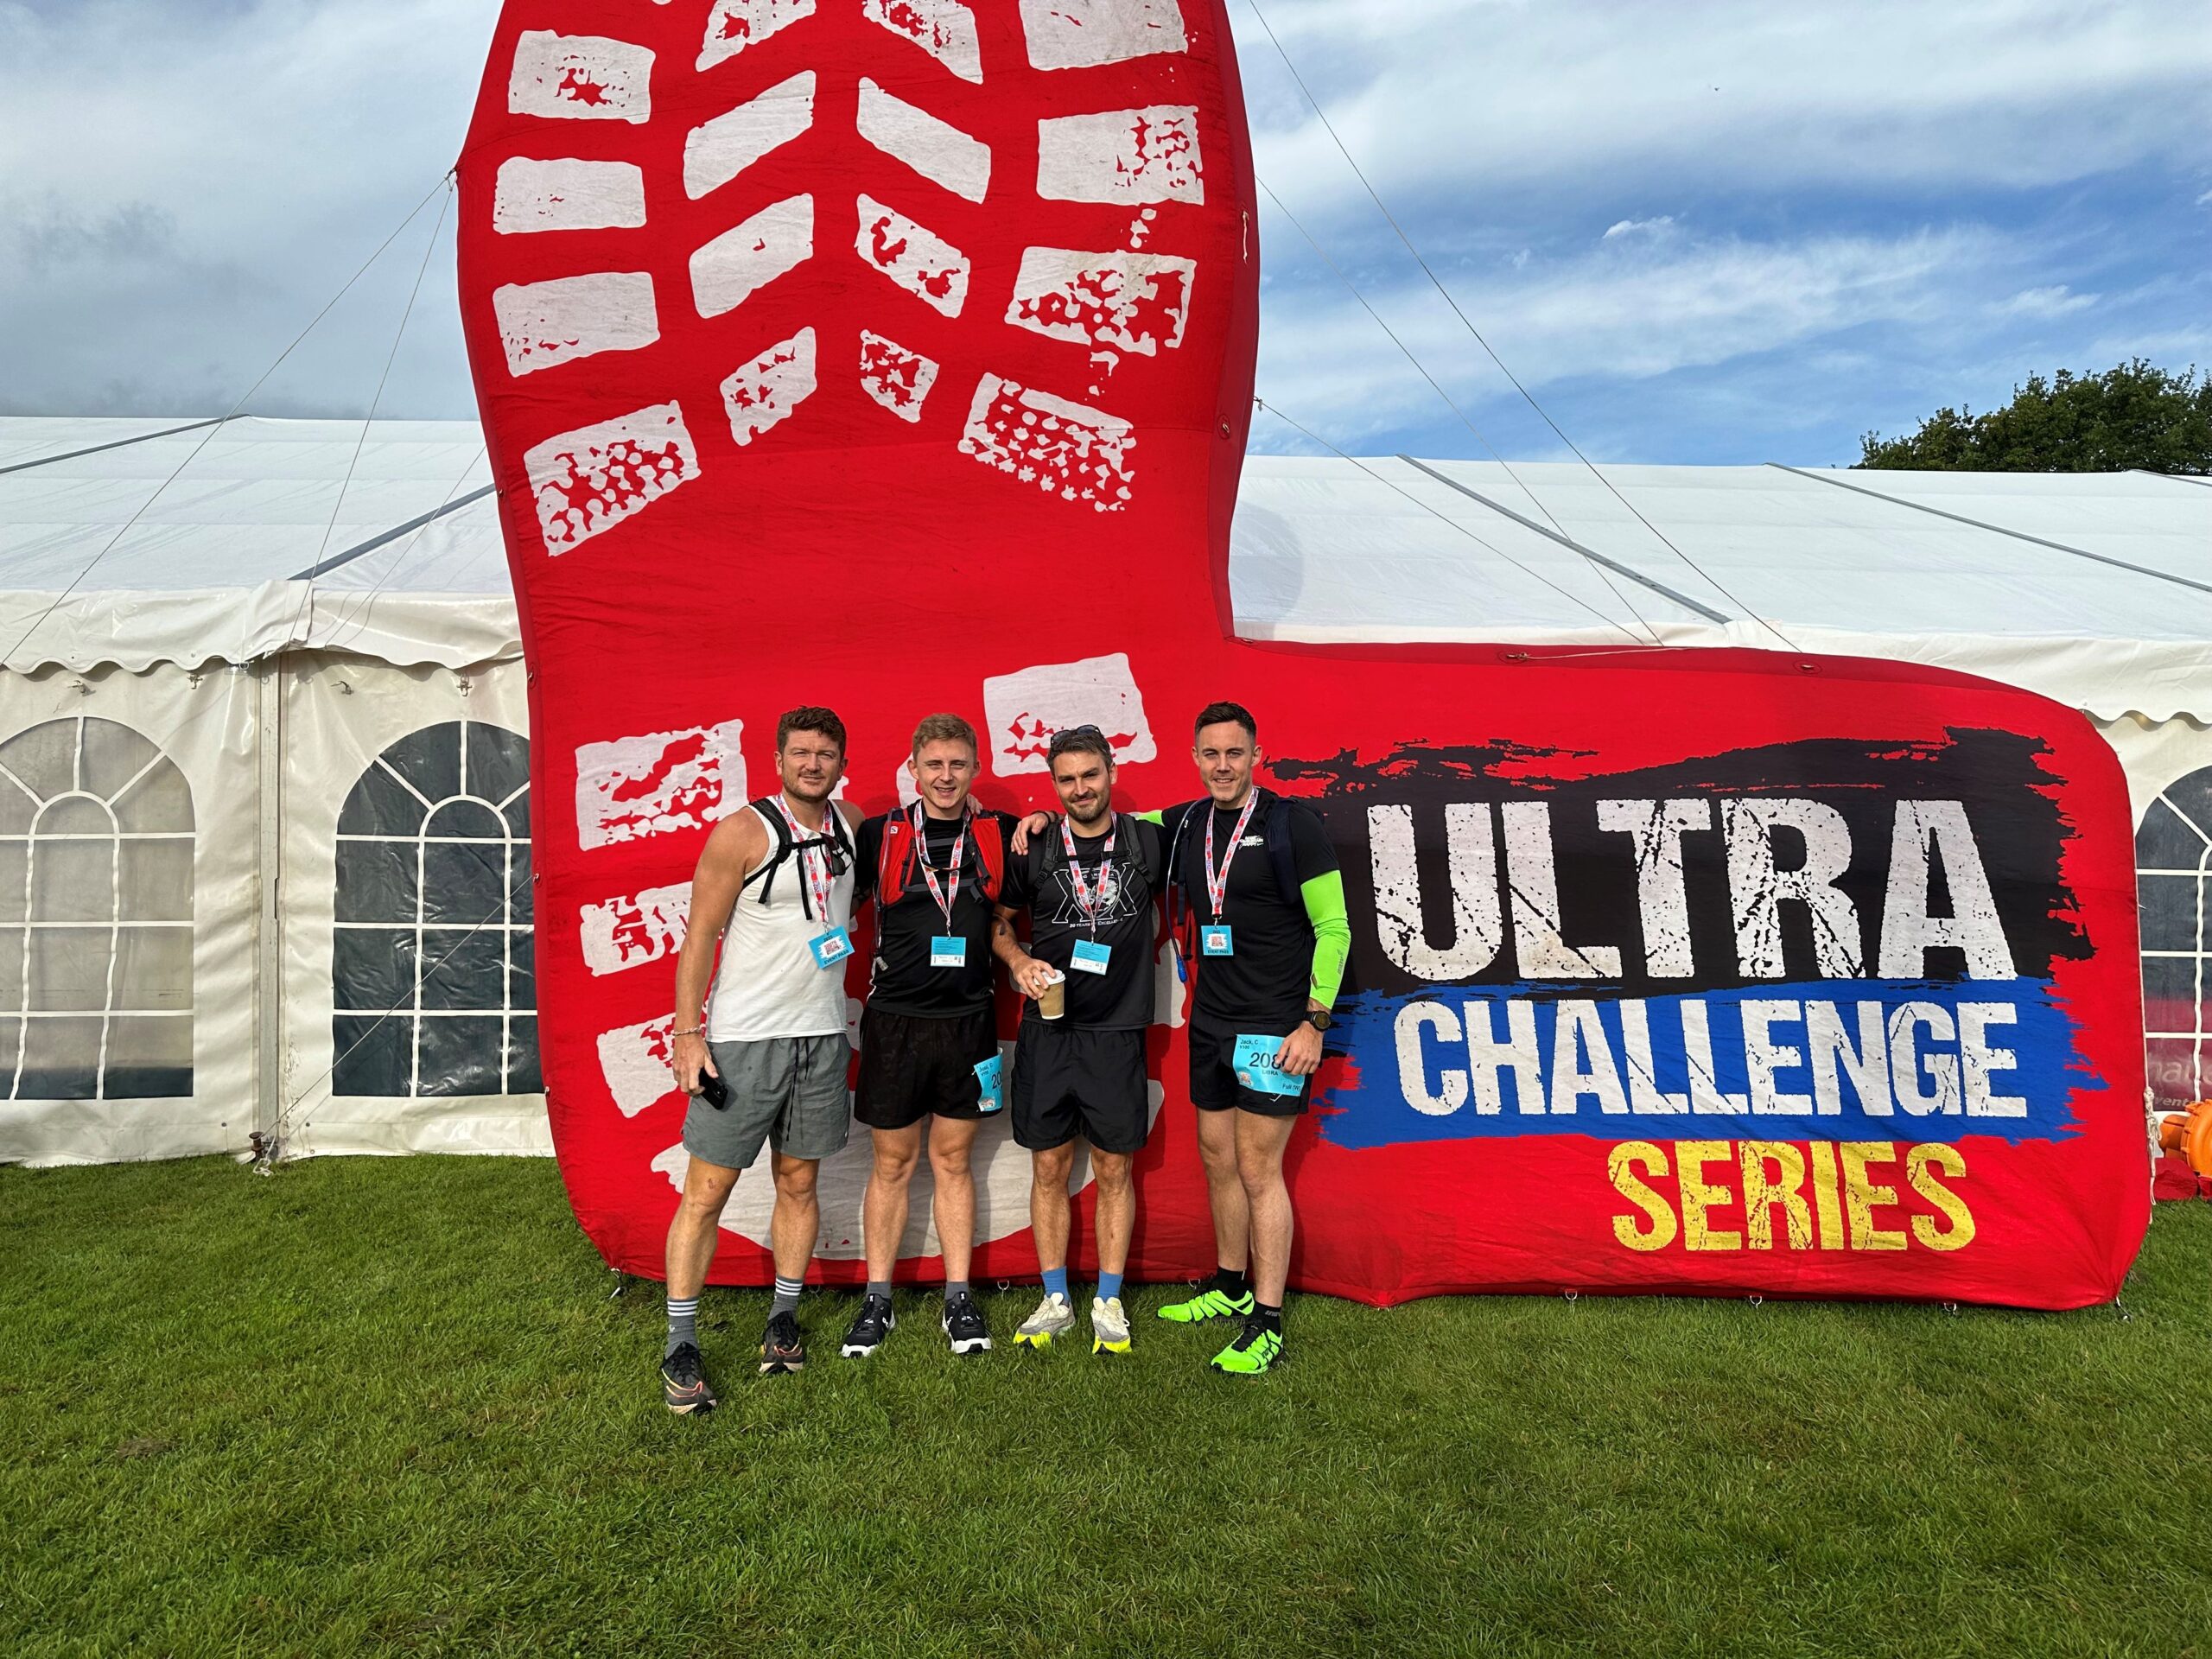 South Coast Ultra Challenge Team Raise Funds For LIBRA